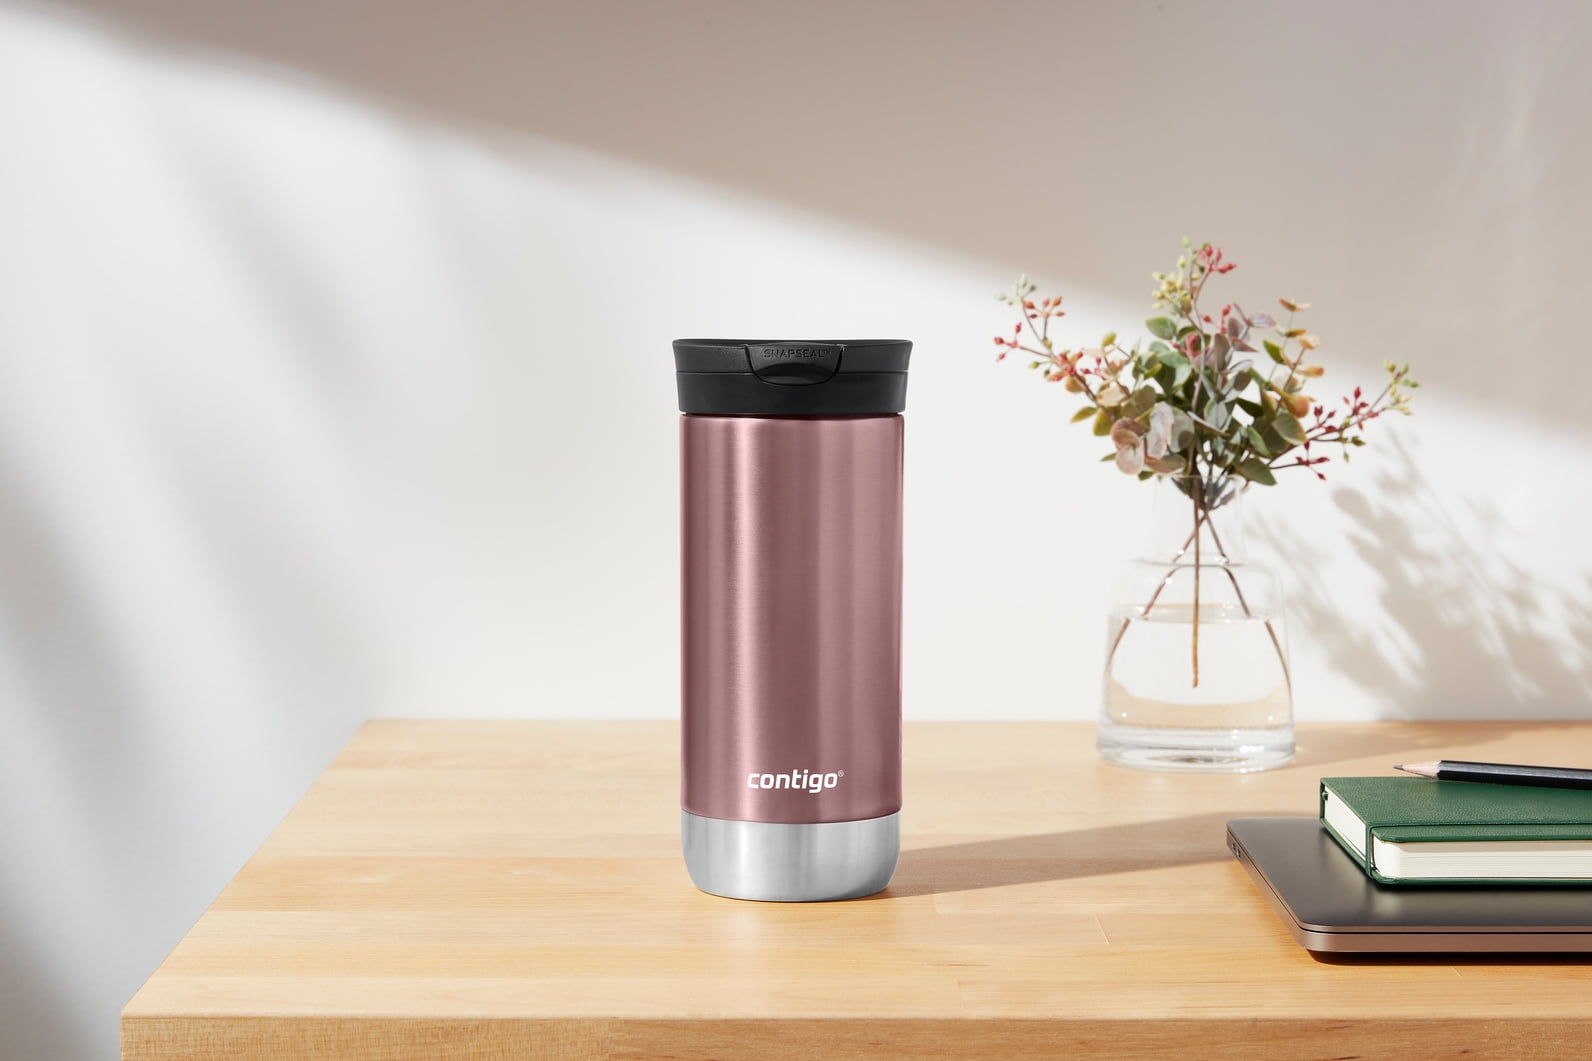 Contigo Huron 2.0 Stainless Steel Travel Mug with SNAPSEAL Lid in